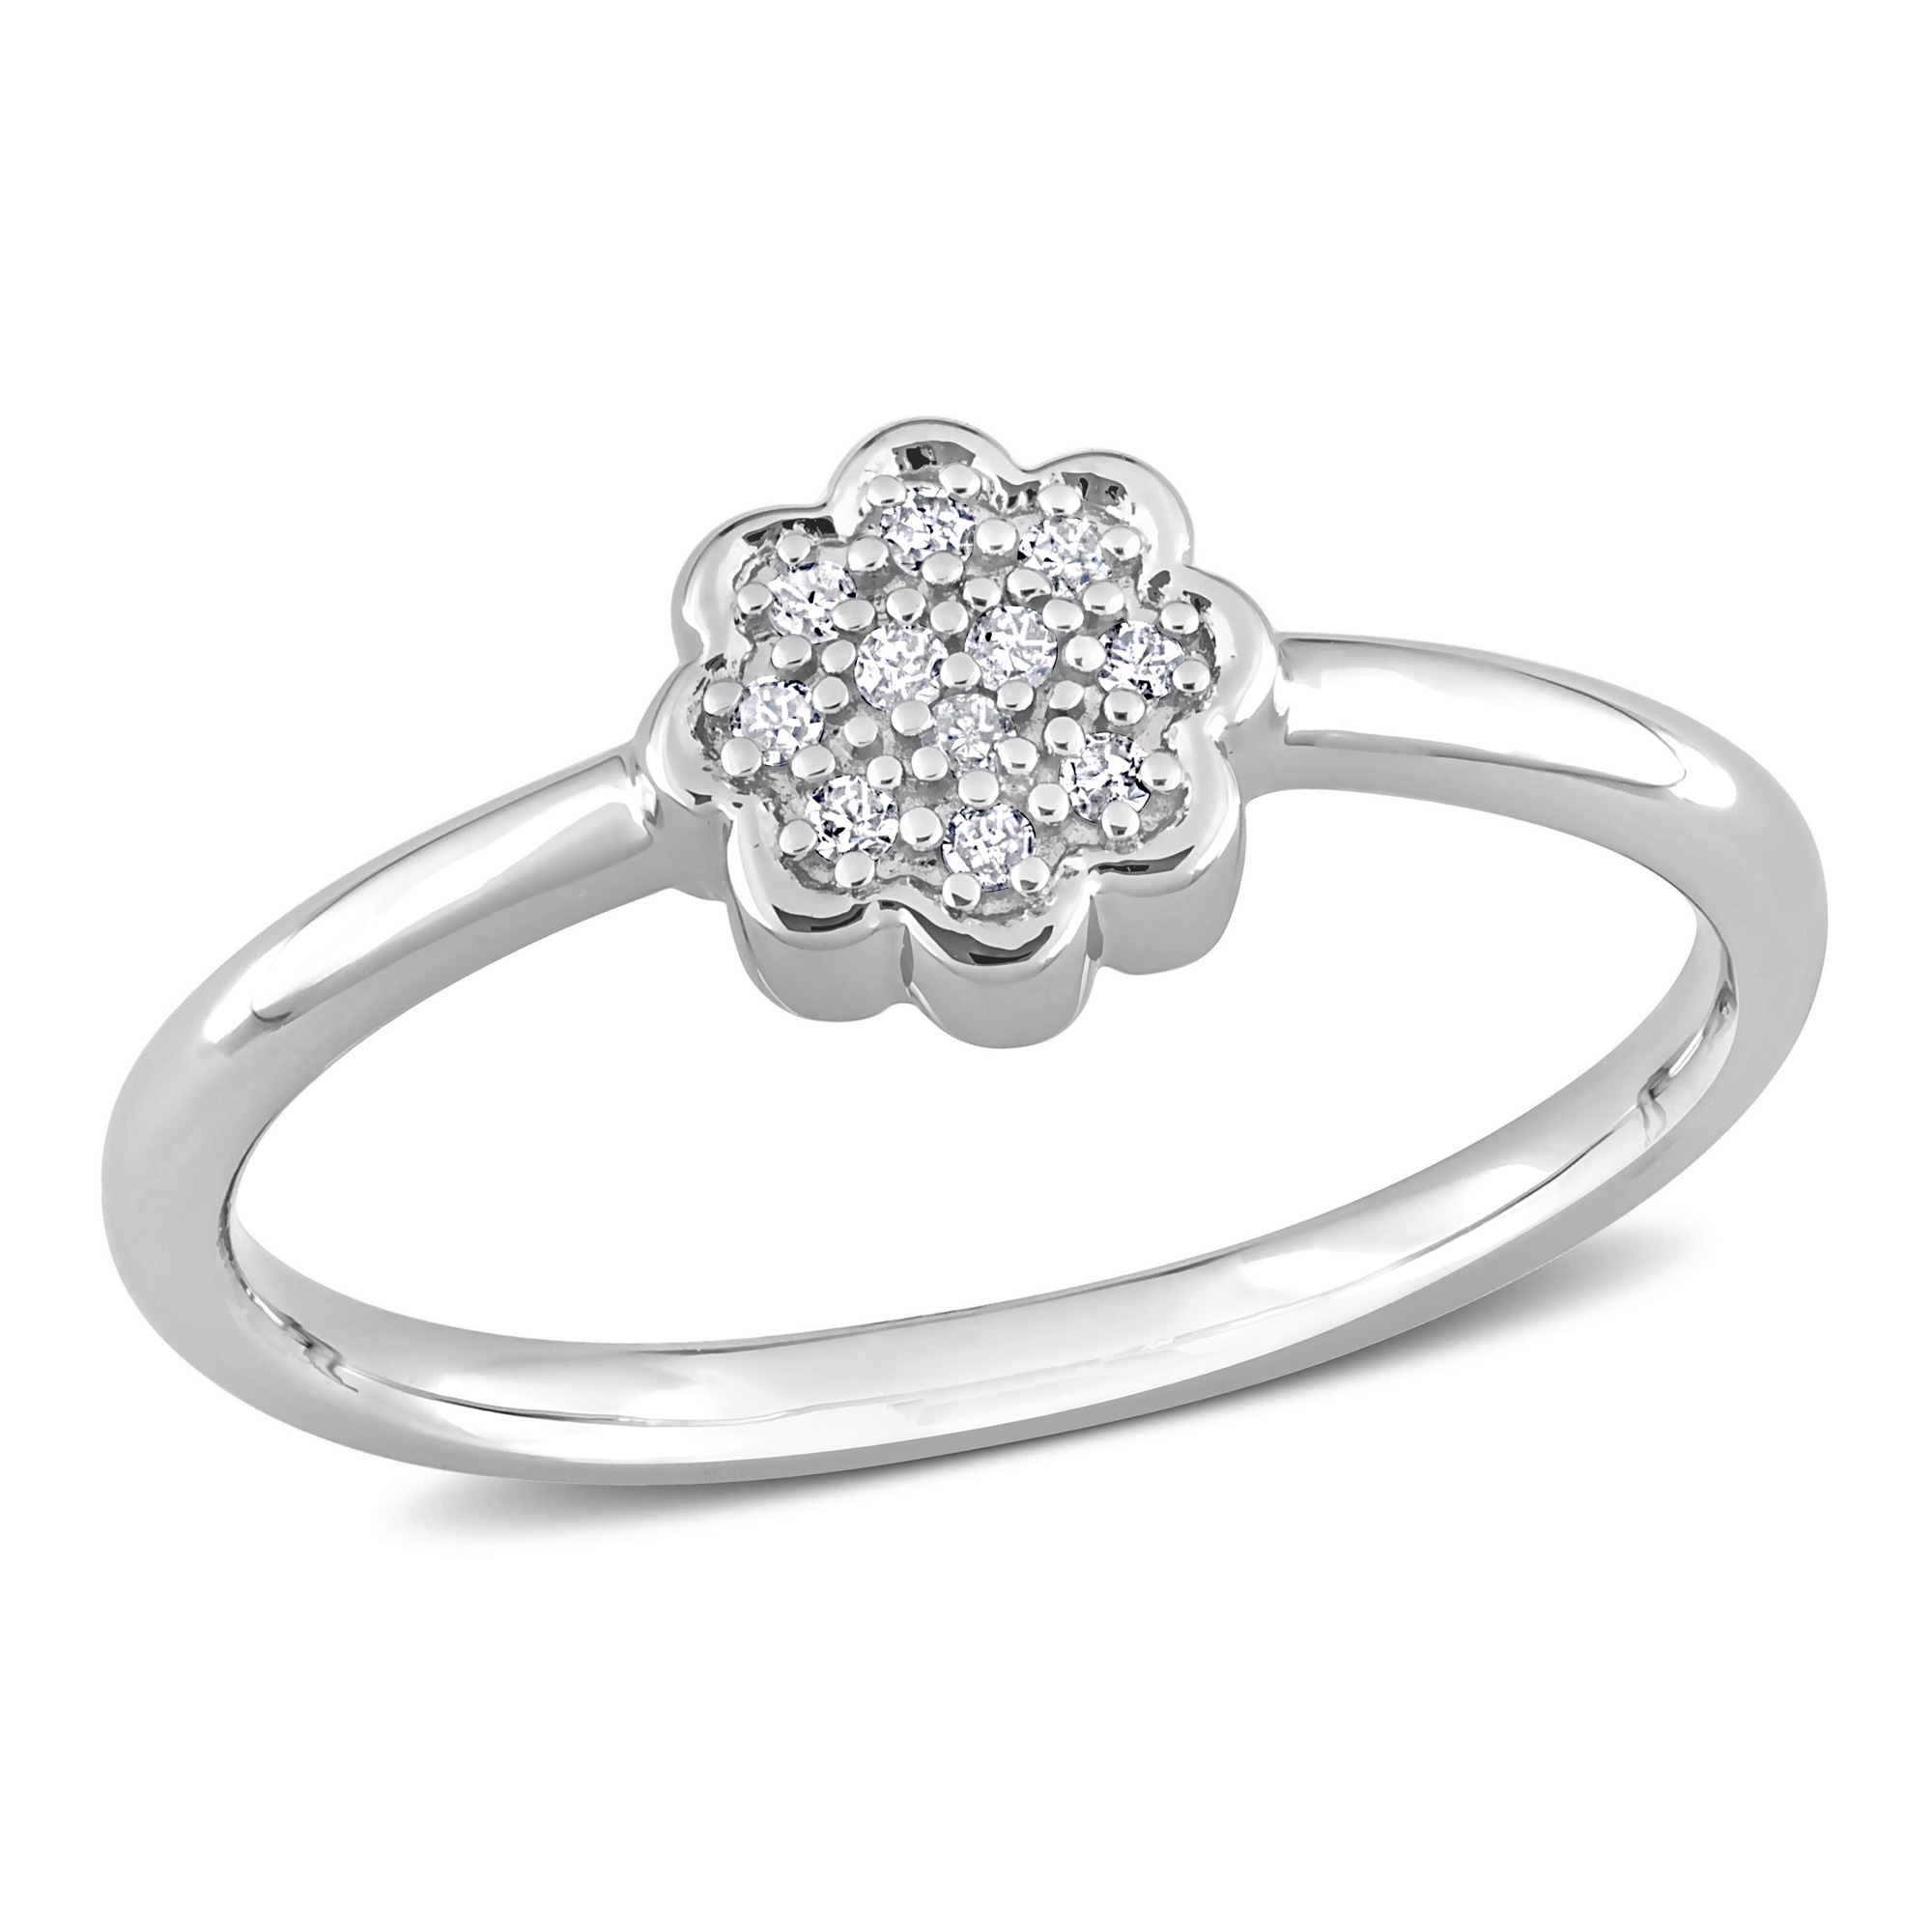 1/20ctw Diamond Sterling Silver Flower Fashion Ring - Size 7